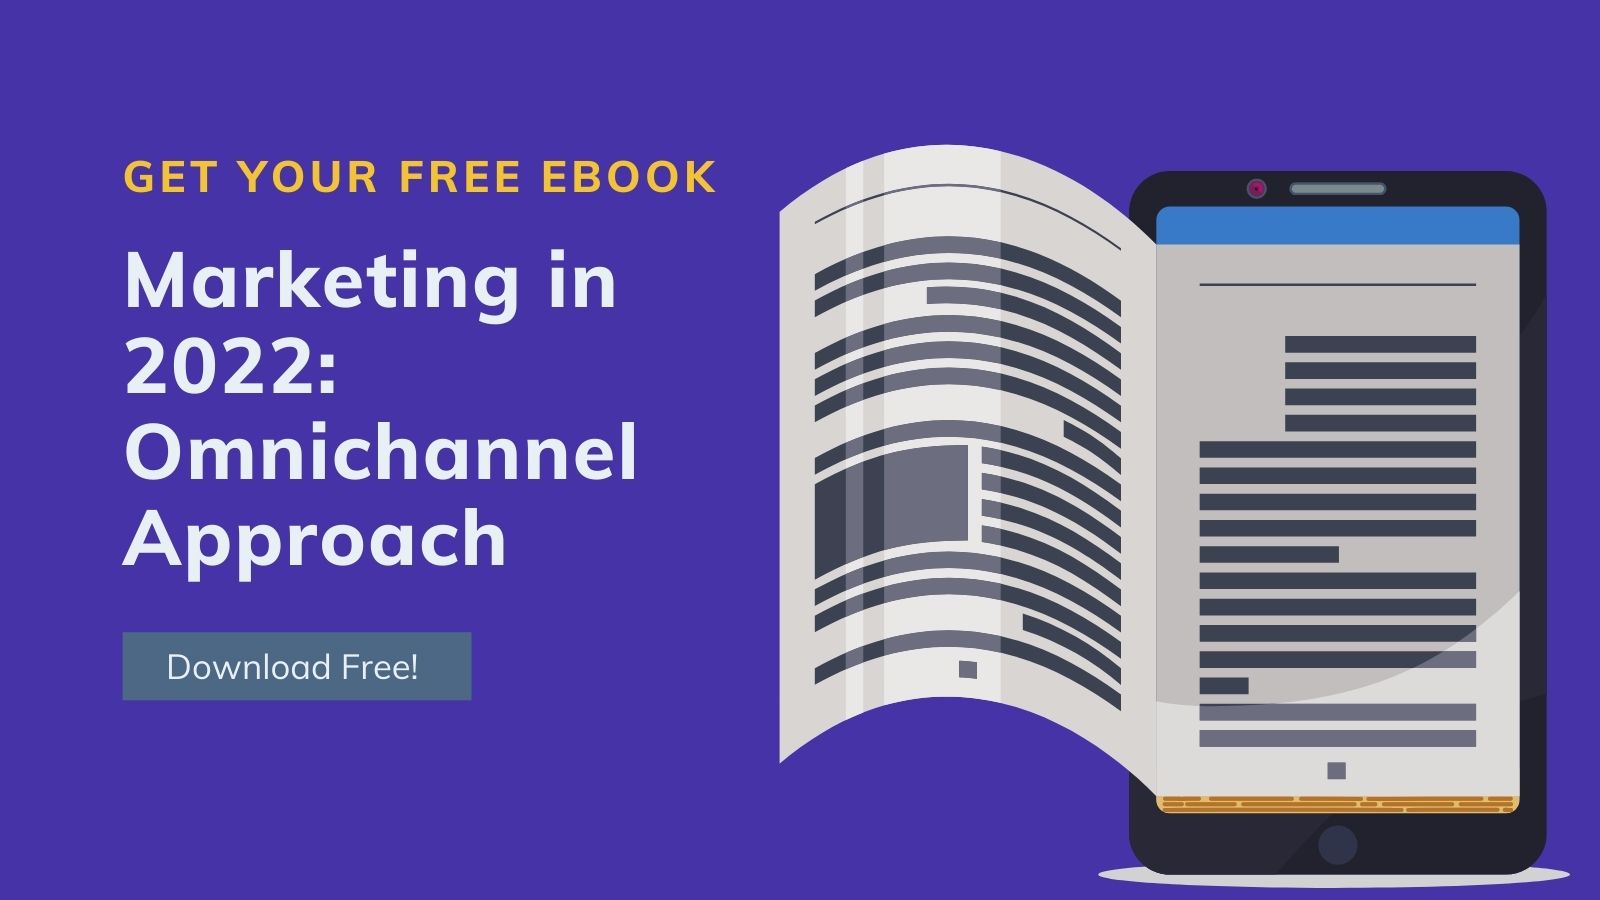 Omnichannel ebook and guide on agilitycms.com